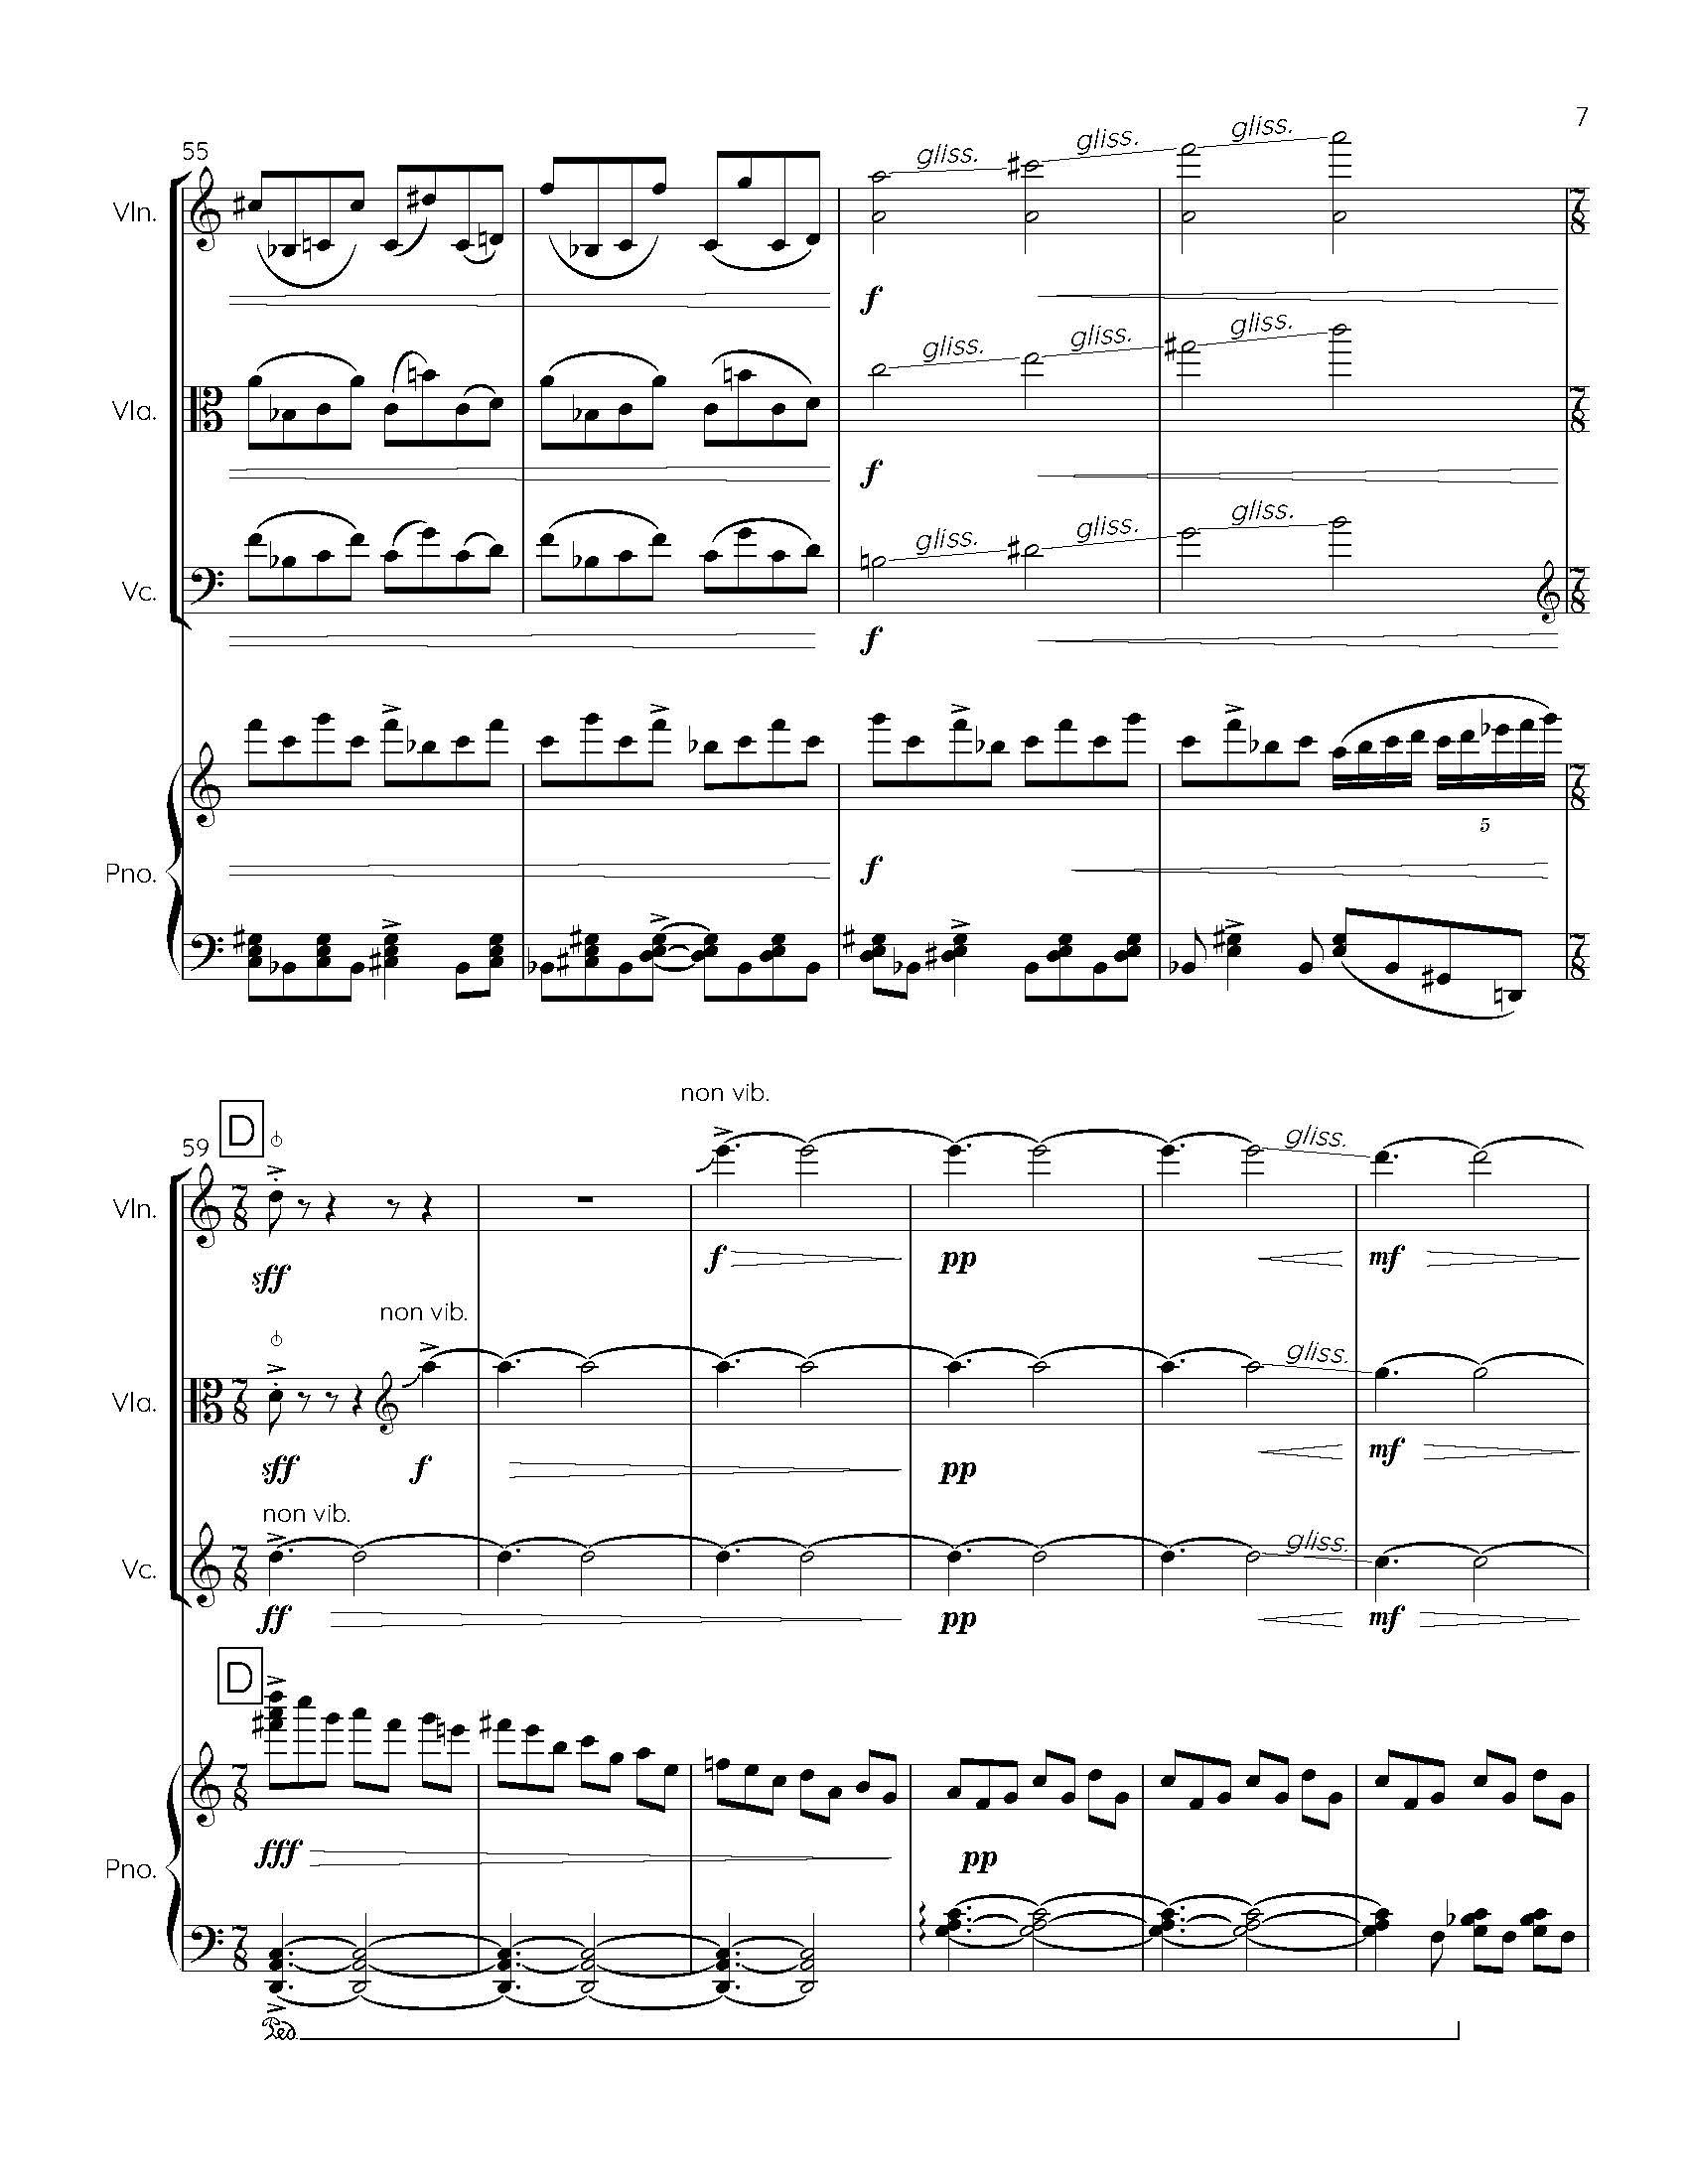 I S L A N D I - Complete Score_Page_13.jpg